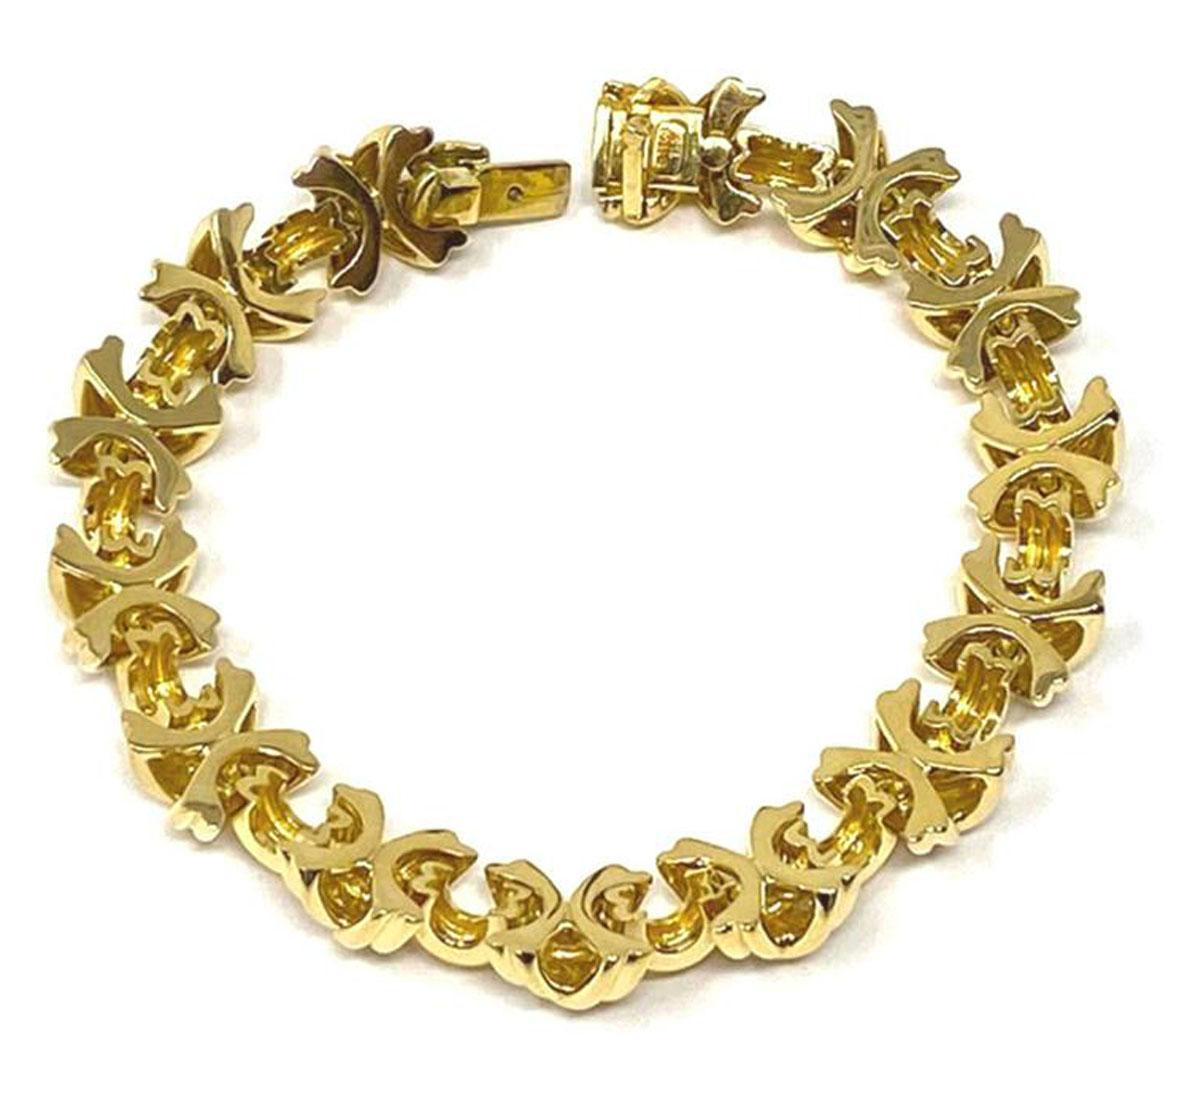 This is a gorgeous authentic bracelet by Tiffany & Co. from the Signature X link collection. It is crafted from 18k yellow gold with a polished finish. The grooved X links are joined together with small curved bar and it secures with a push in clasp